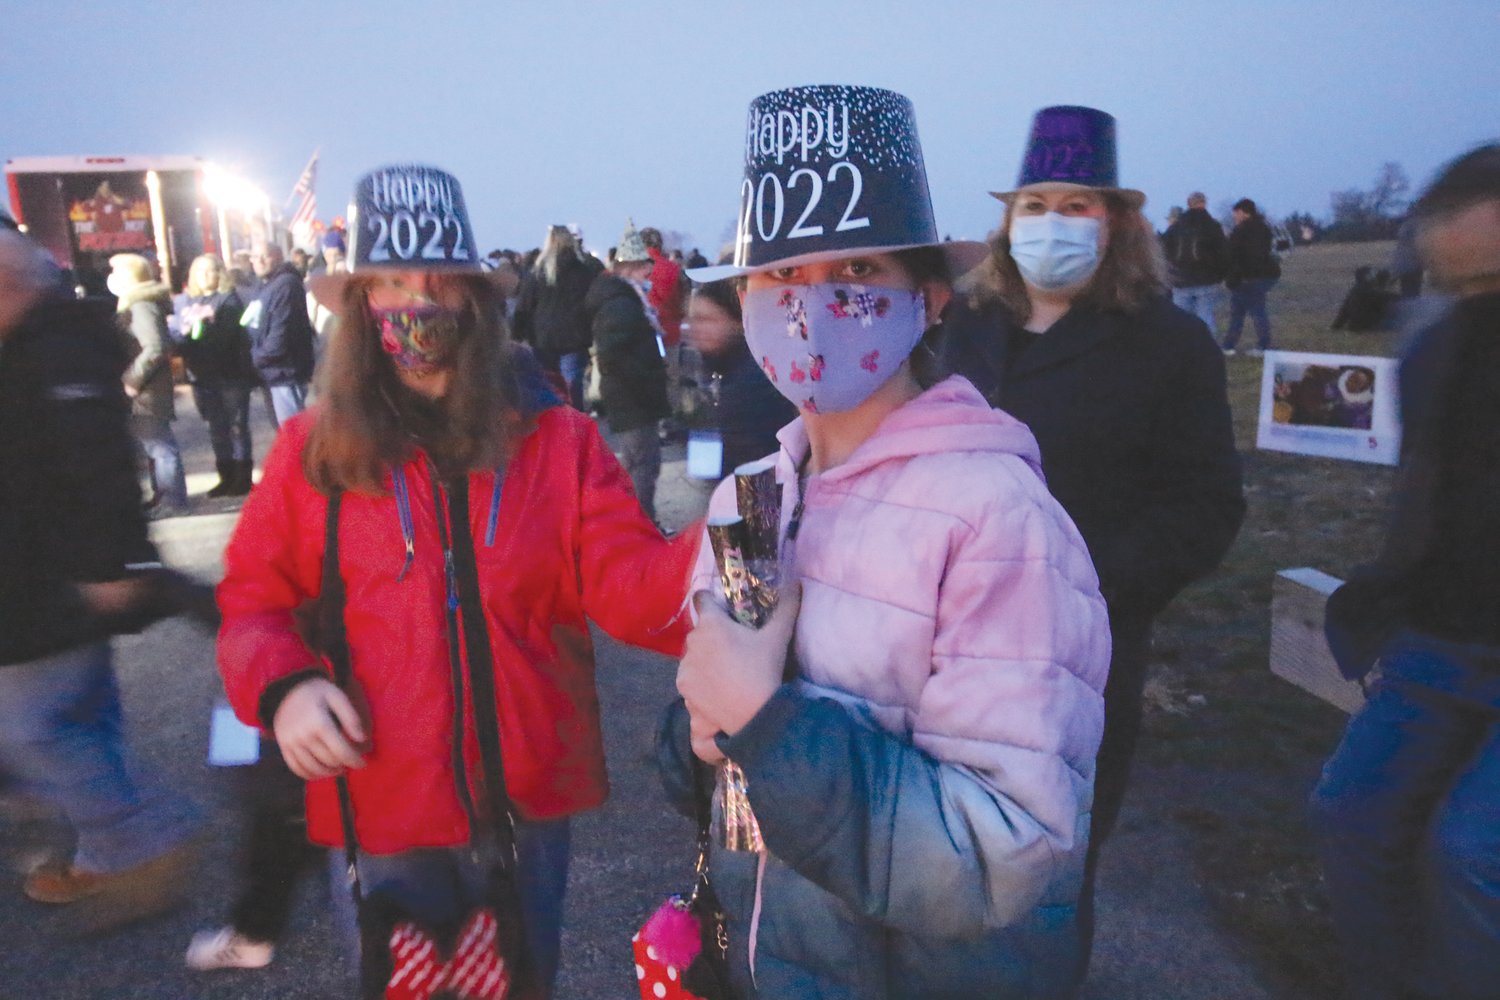 HATS ON FOR 2022: Revelers came appropriately attired for the occasion.